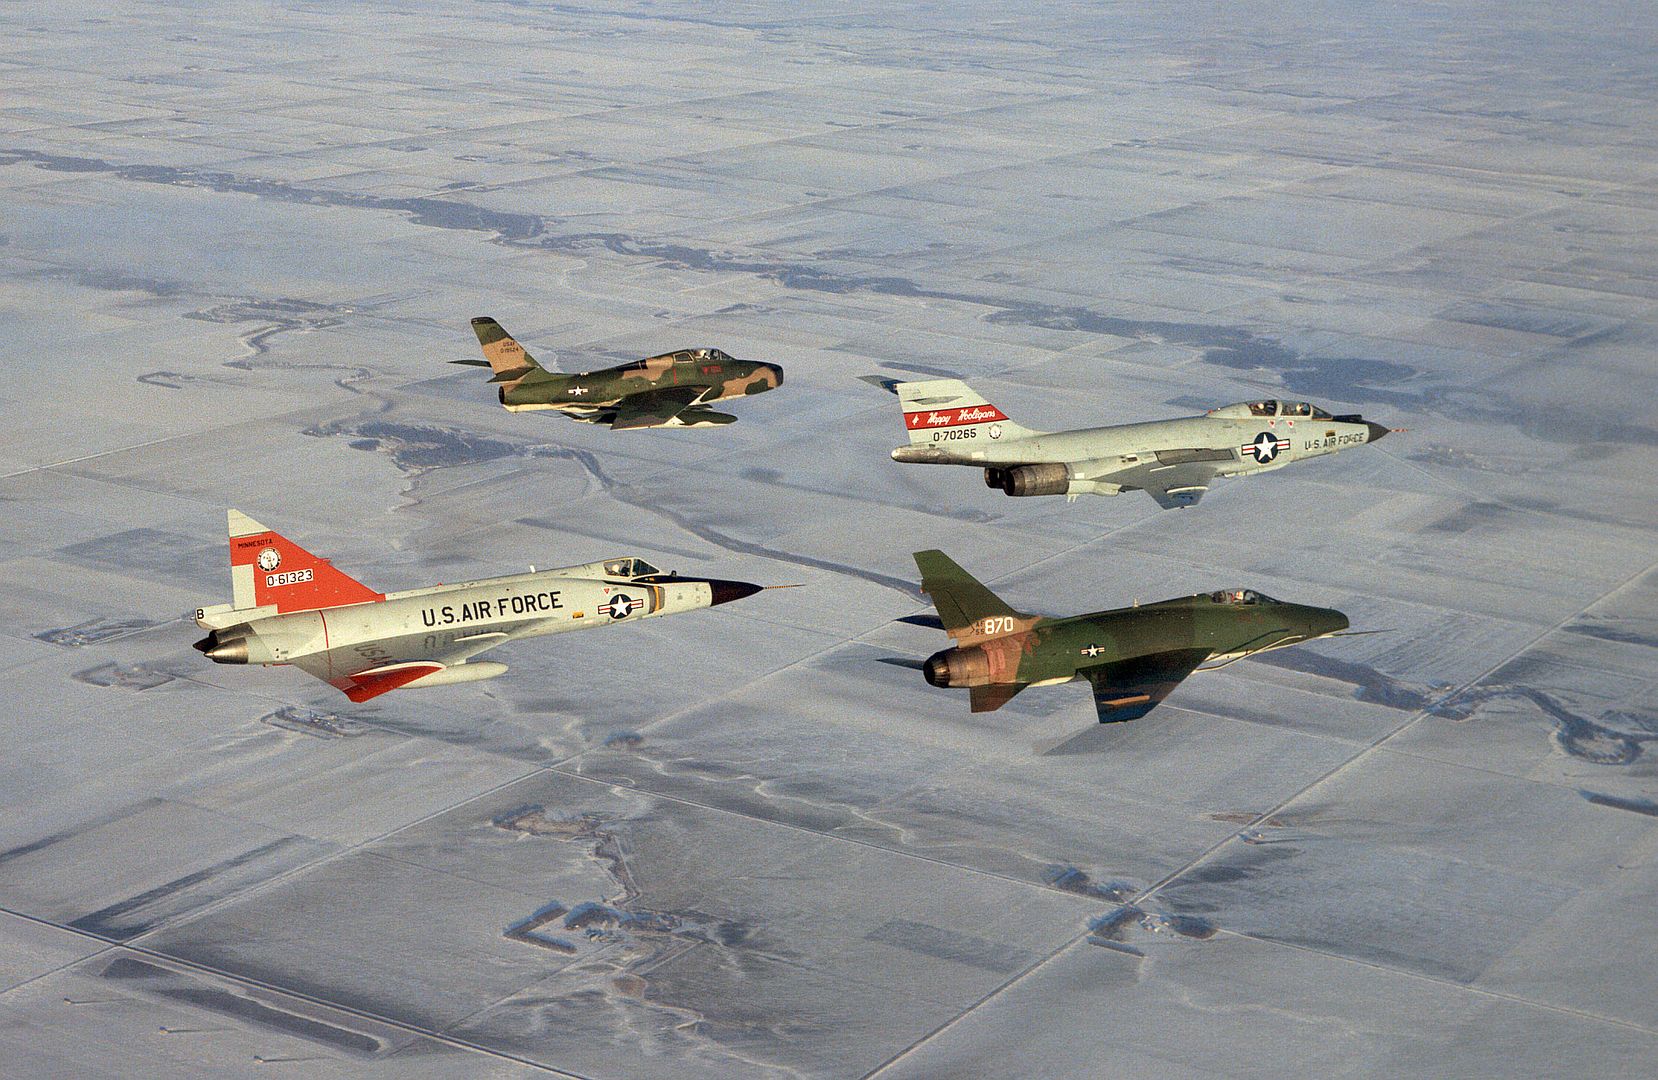  Air Force Aircraft Assigned To The 119th Fighter WingHappy Hooligans North Dakota Air National Guard Fly In Formation Near At Hector International Field North Dakota